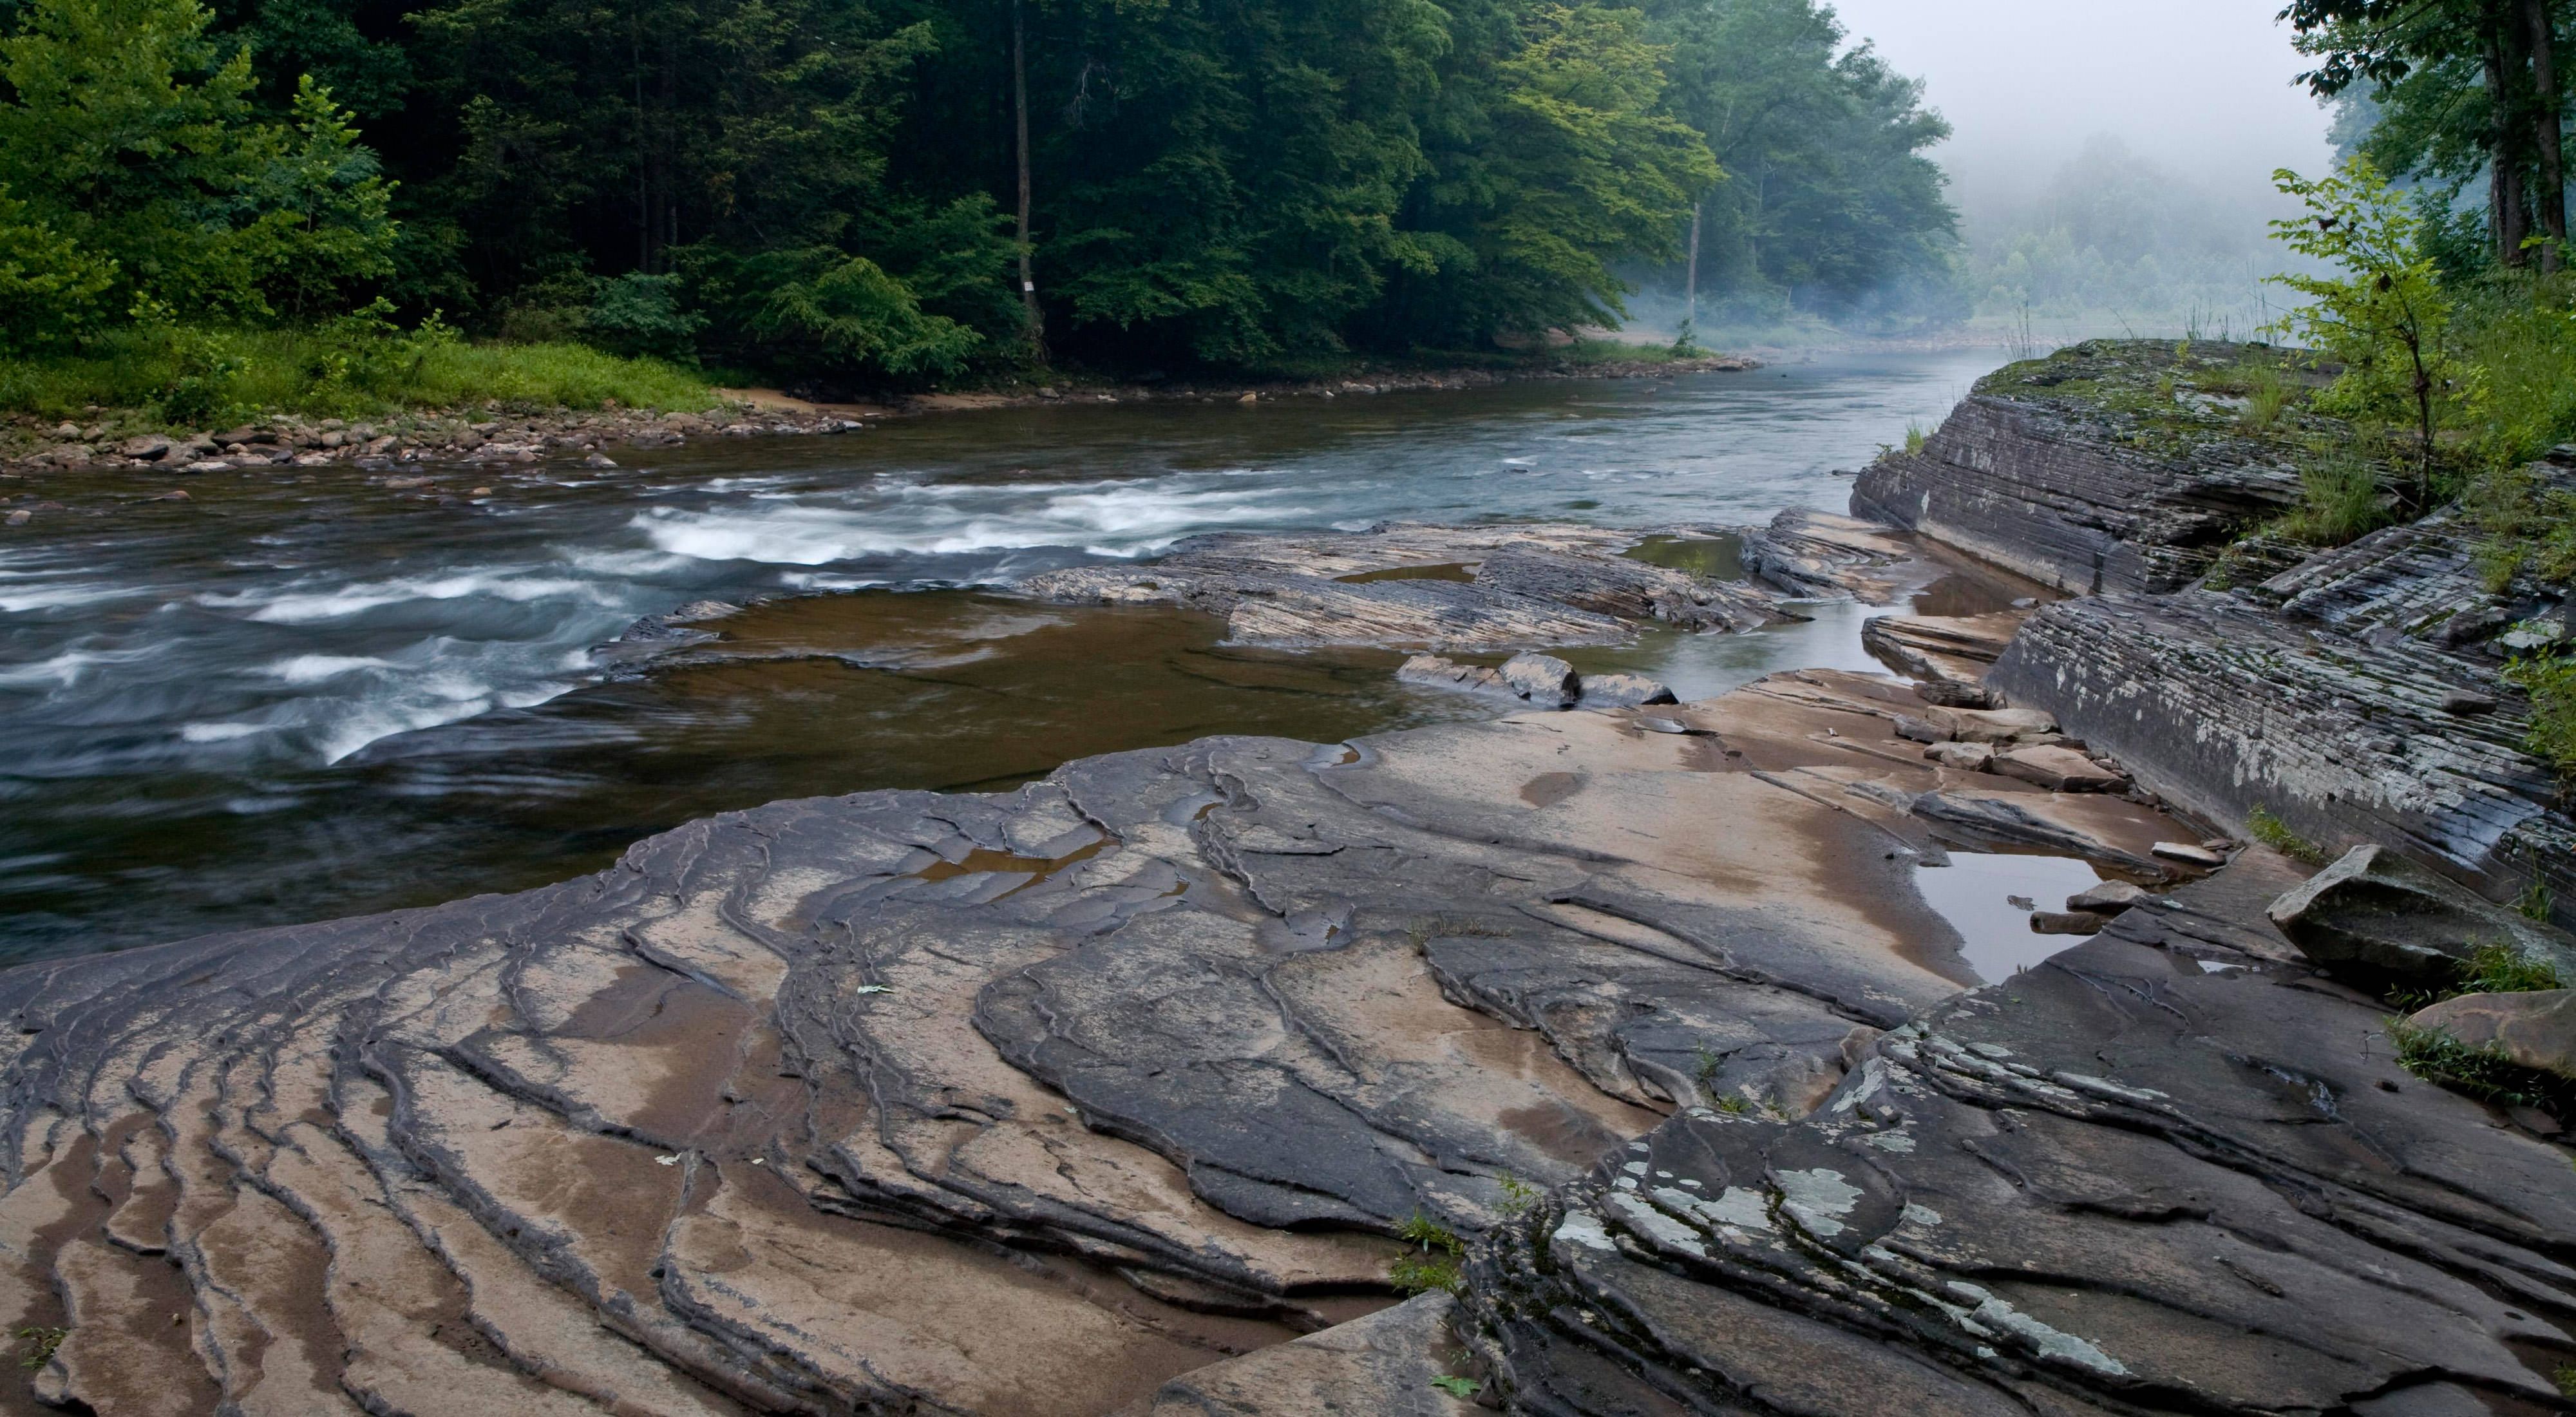 Morning mist over the Dry Fork River, a tributary of the Black Fork of the Cheat River in eastern West Virginia.